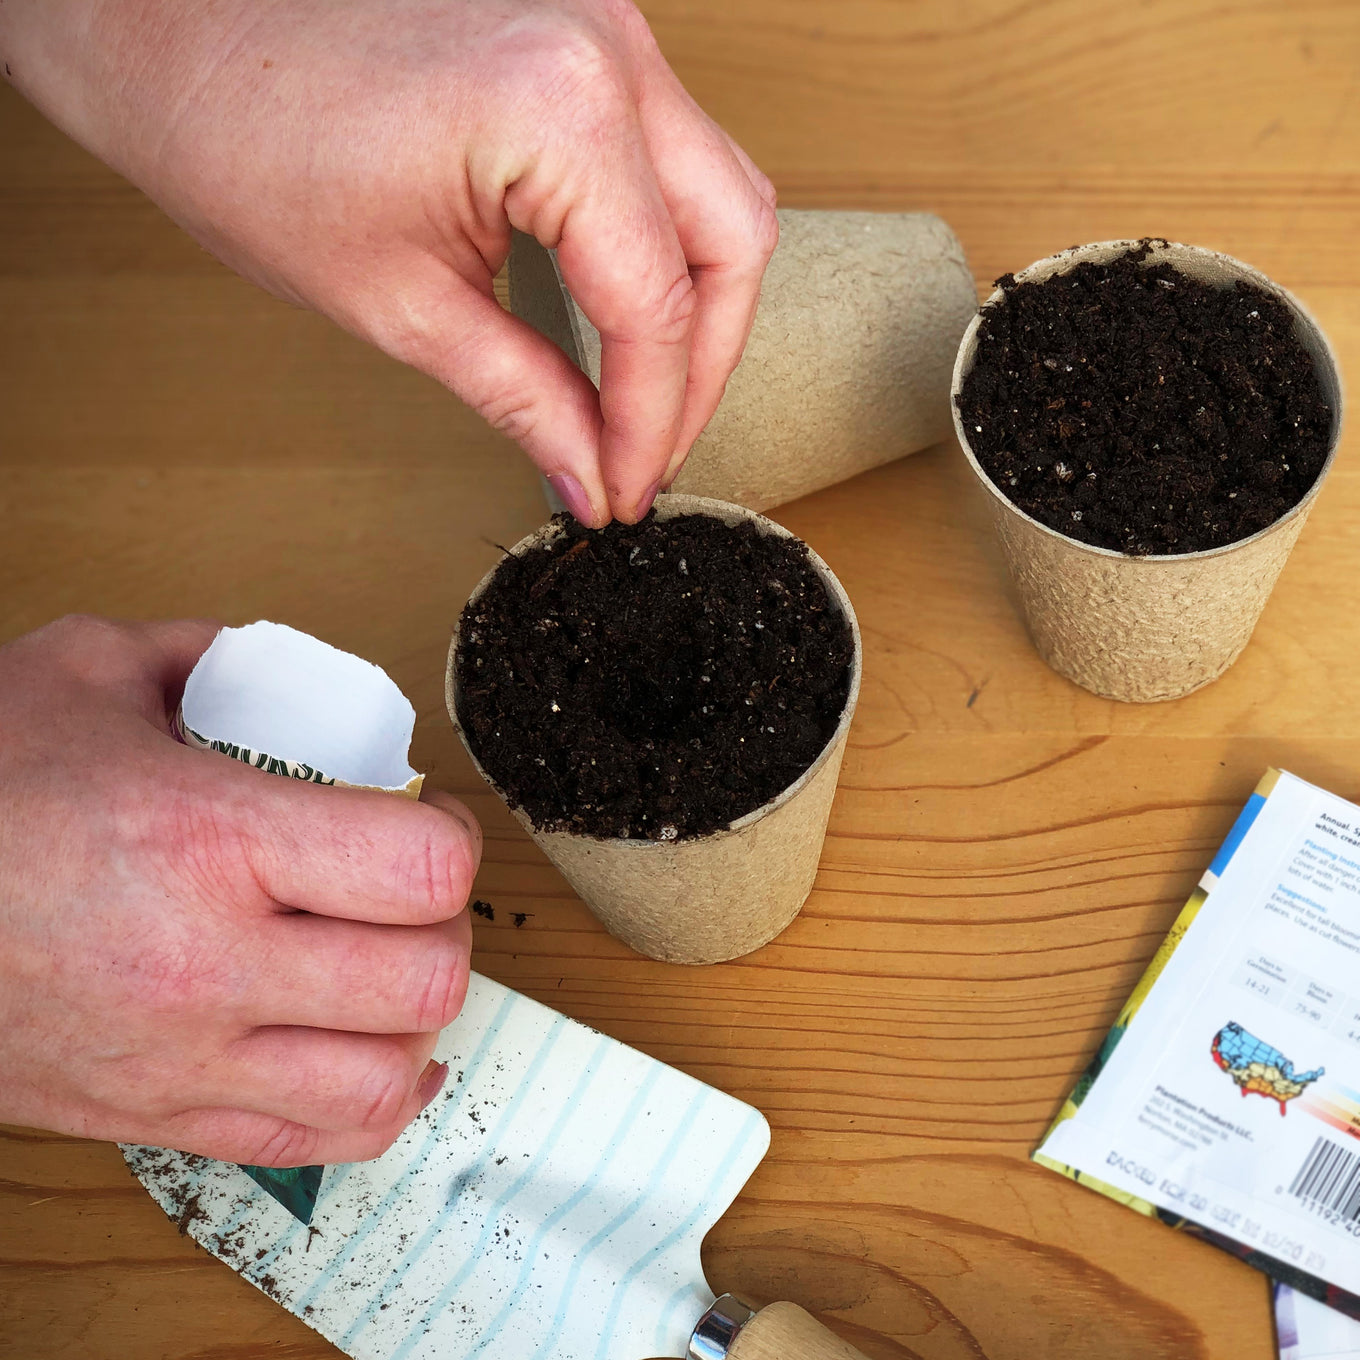 Start Organic Sumter Cucumber seeds in biodegradable peat pots or paper pots for easy transplanting that will reduce root shock.